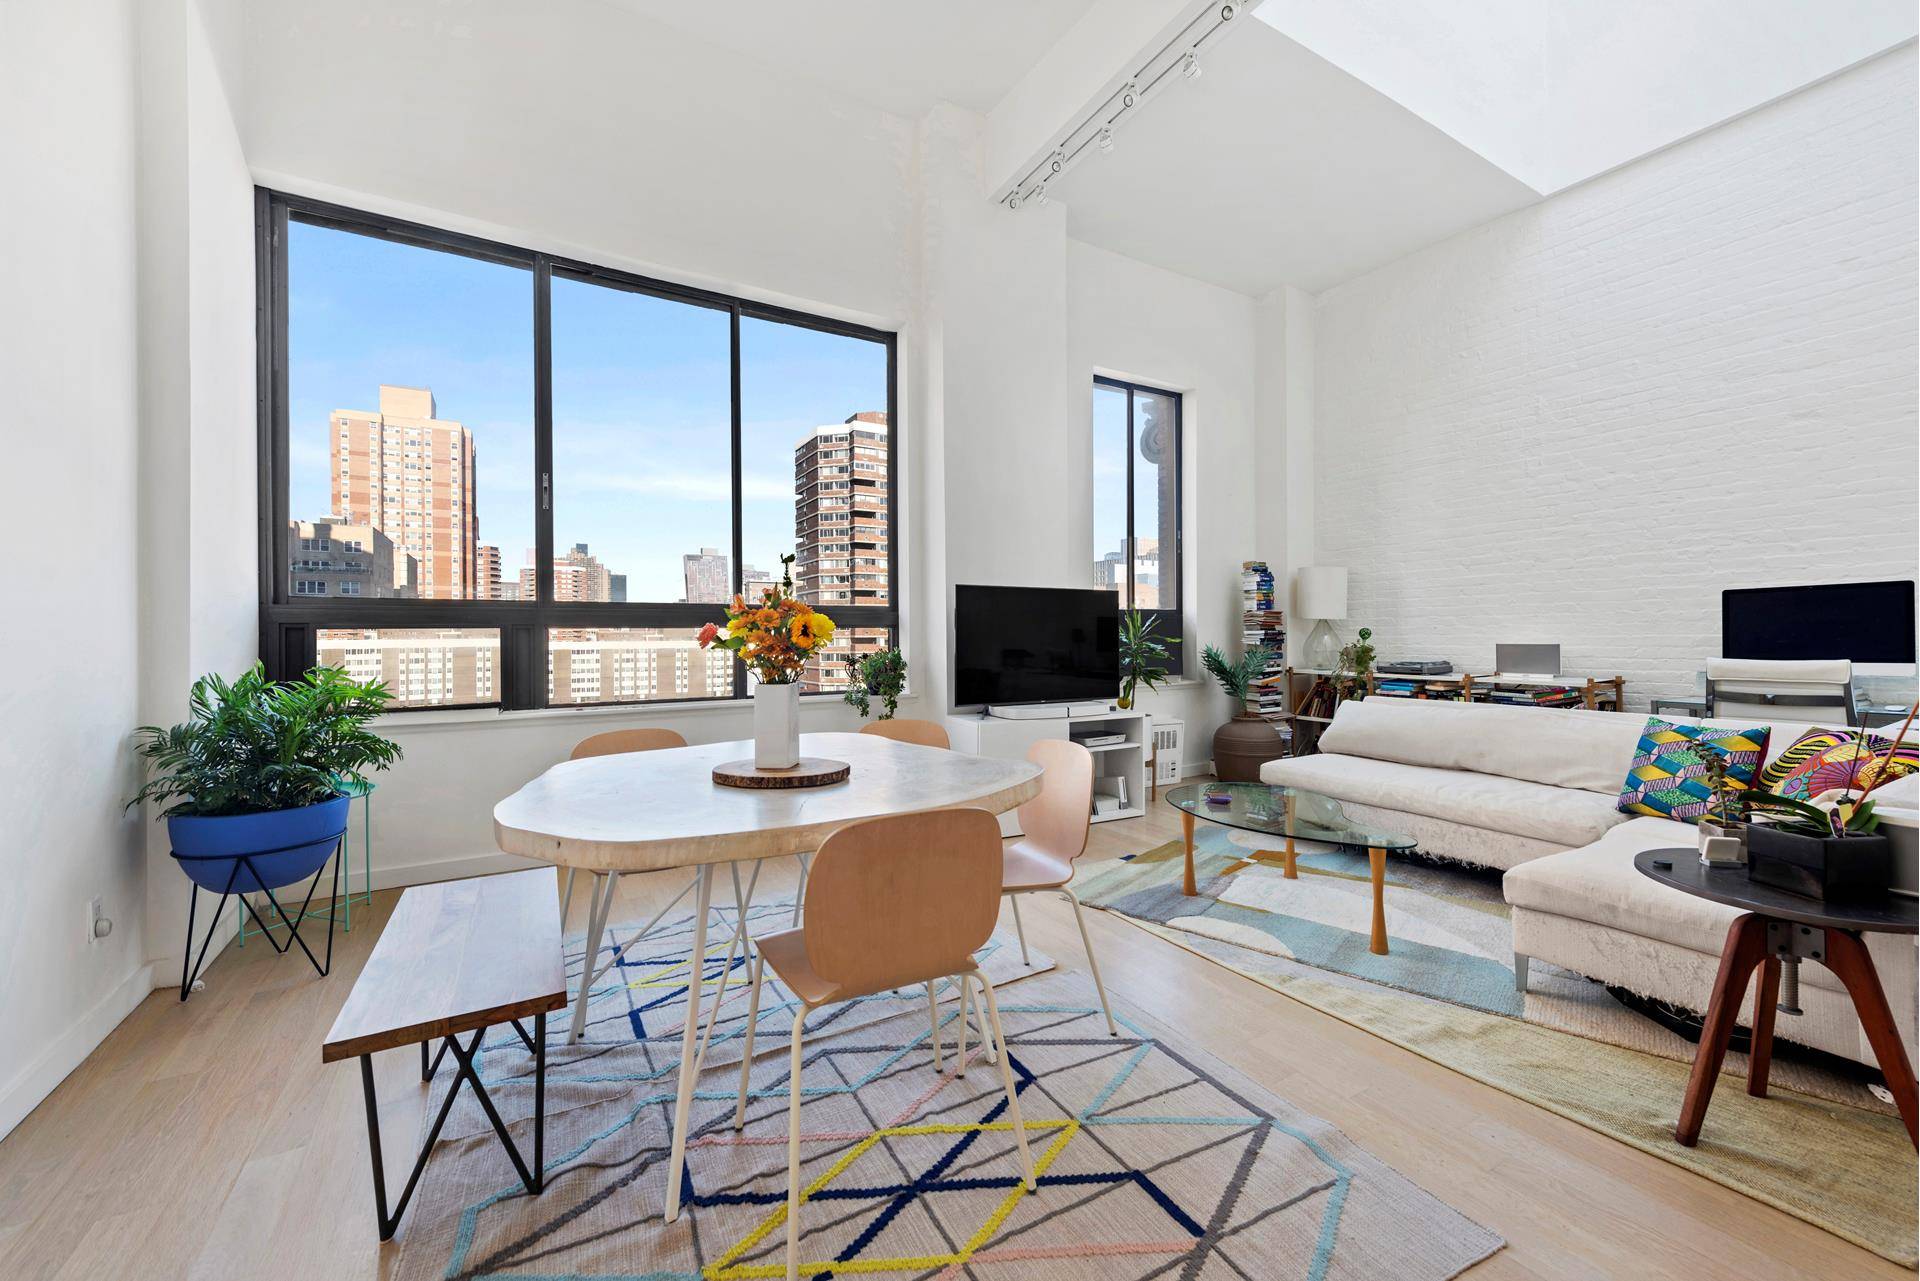 Sun drenched one bedroom loft with 20 foot ceilings and mezzanine home office.